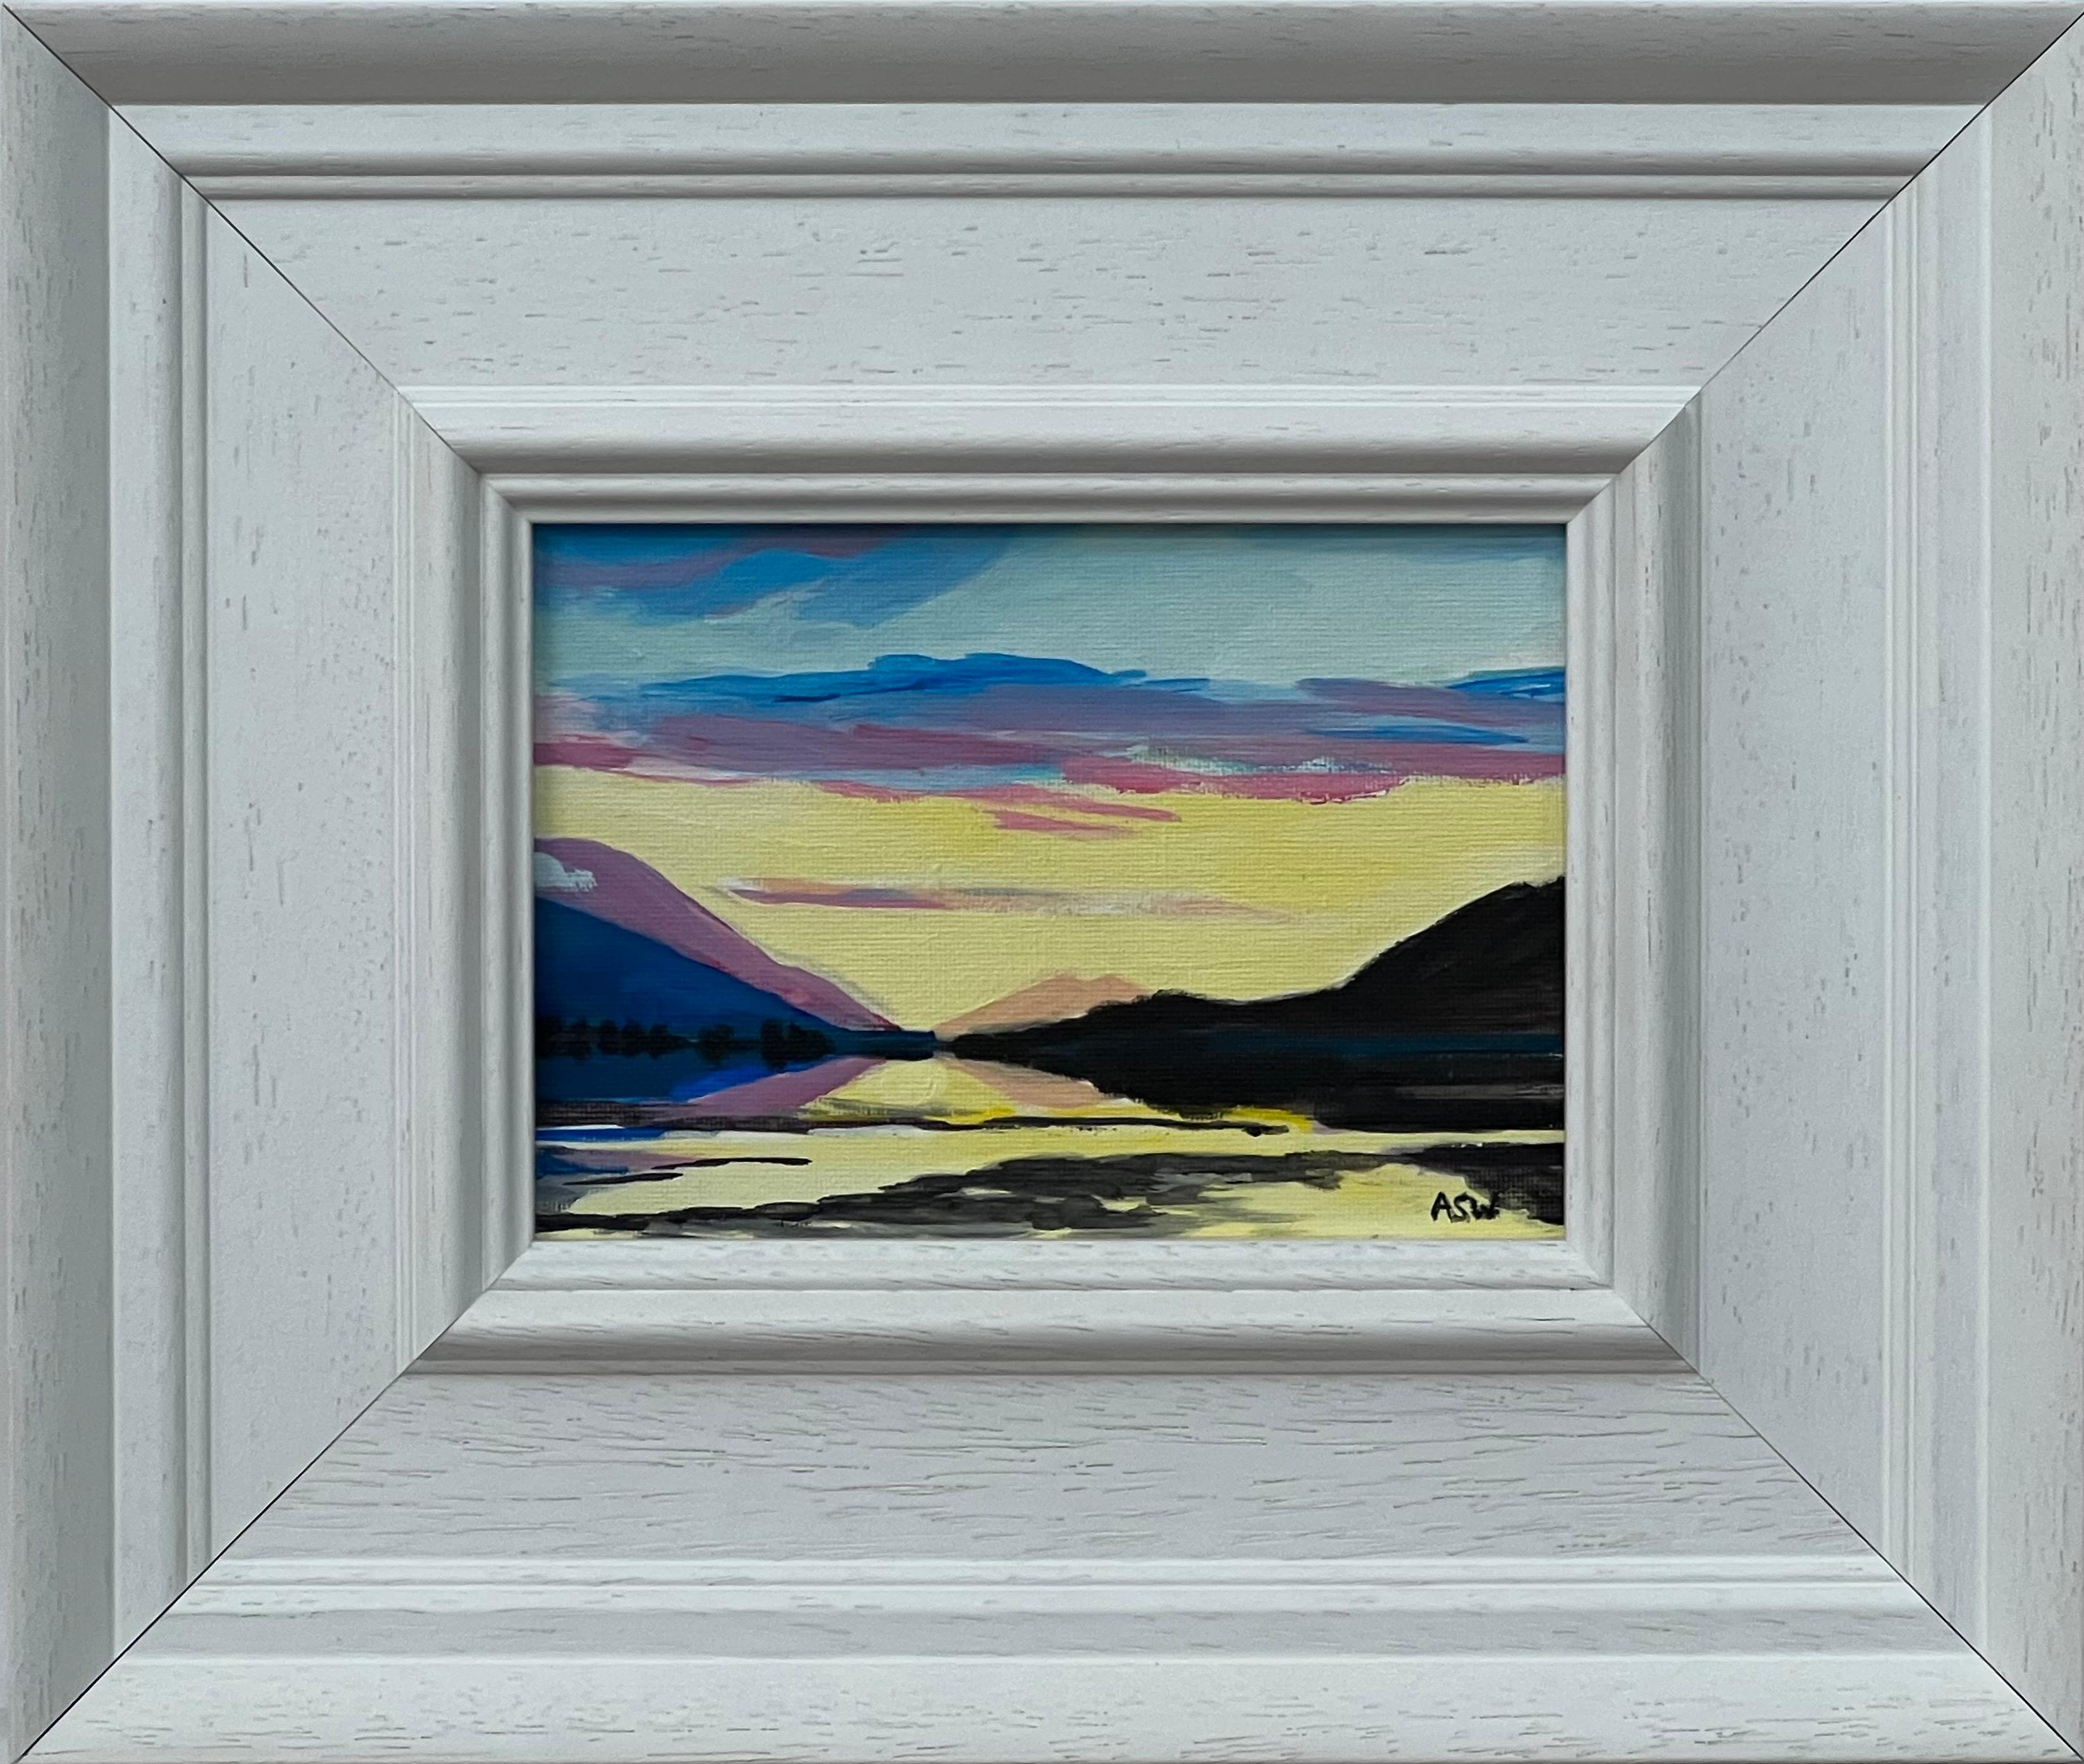 Angela Wakefield Abstract Painting - Miniature Landscape Study of Scottish Highlands by Contemporary British Artist